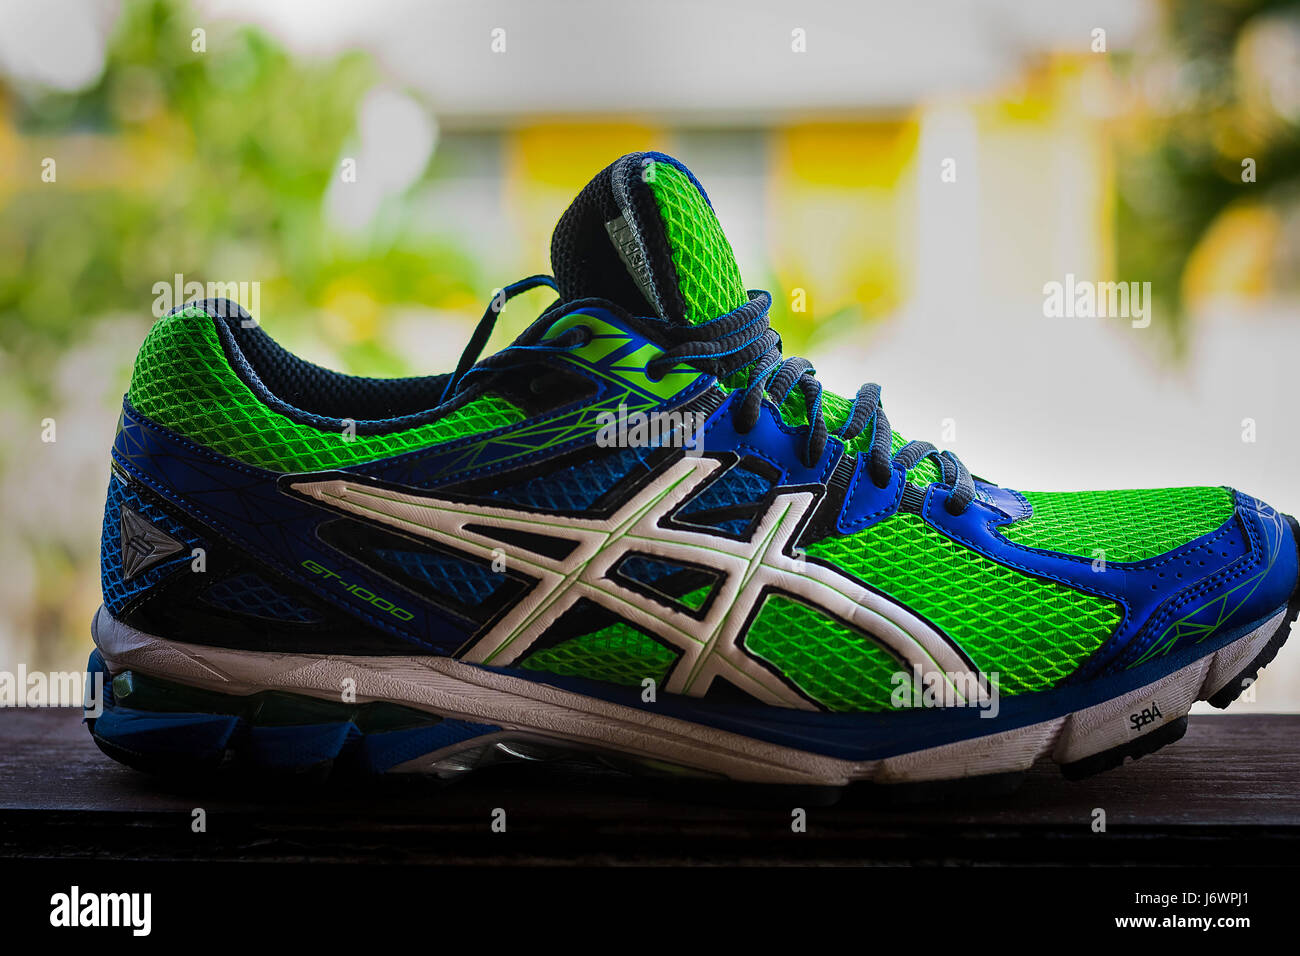 Asics Shoes pictures for advertising in print or on billboards Stock Photo  - Alamy